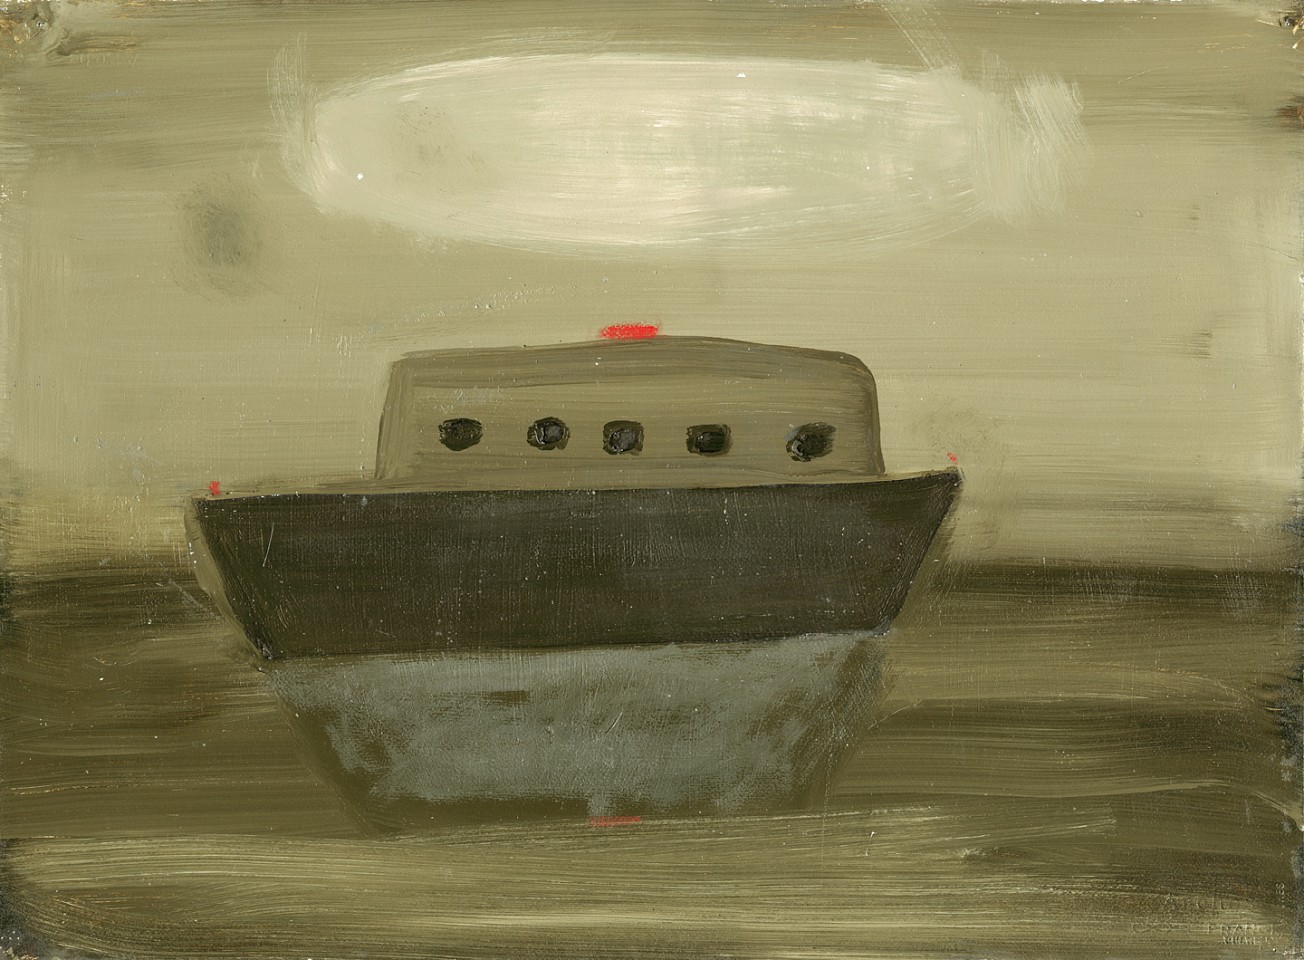 Kathryn Lynch
Pink Cloud Over Tug, 2015
lyn838
oil on paper, 22 x 30 inches